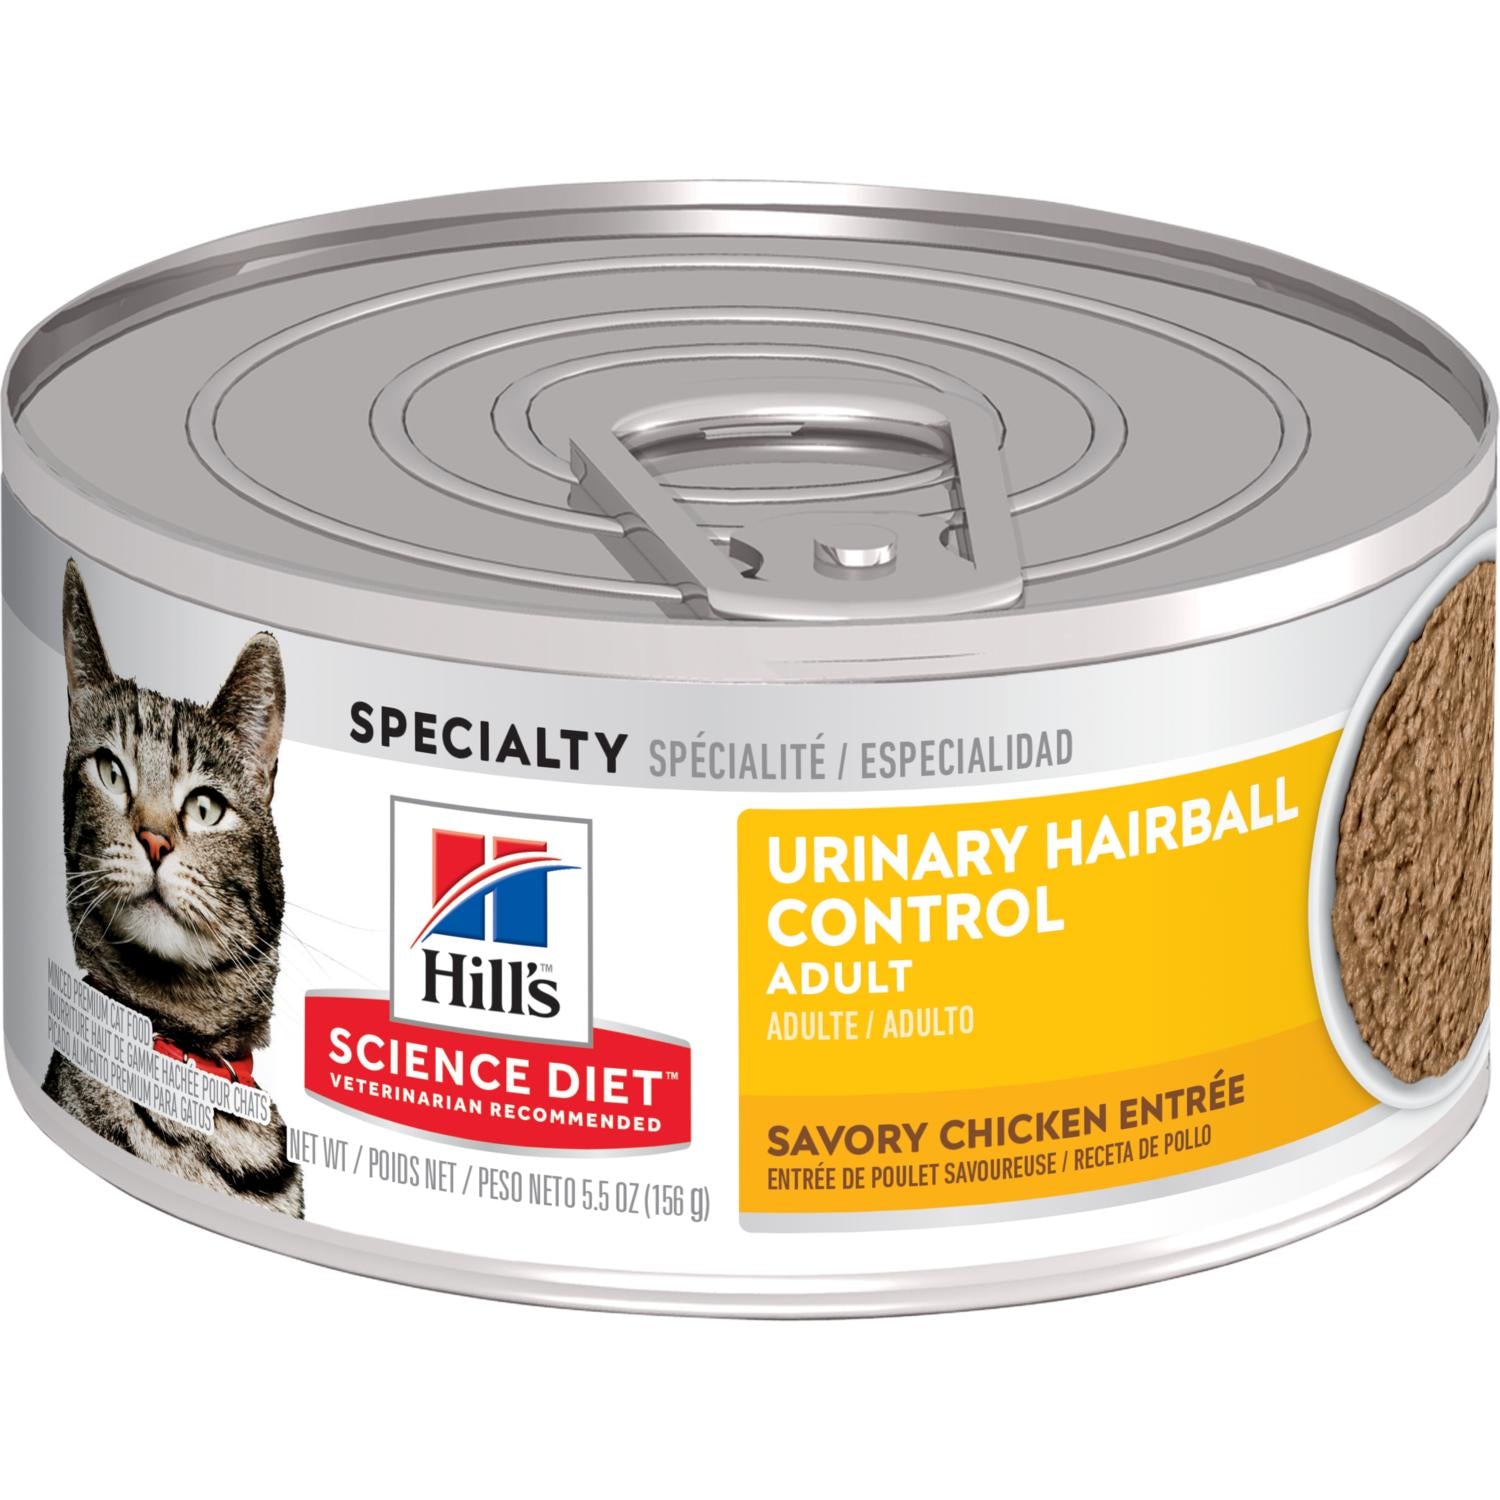 Science Diet Adult Urinary Hairball Control Savory Chicken Entrée Wet Cat Food